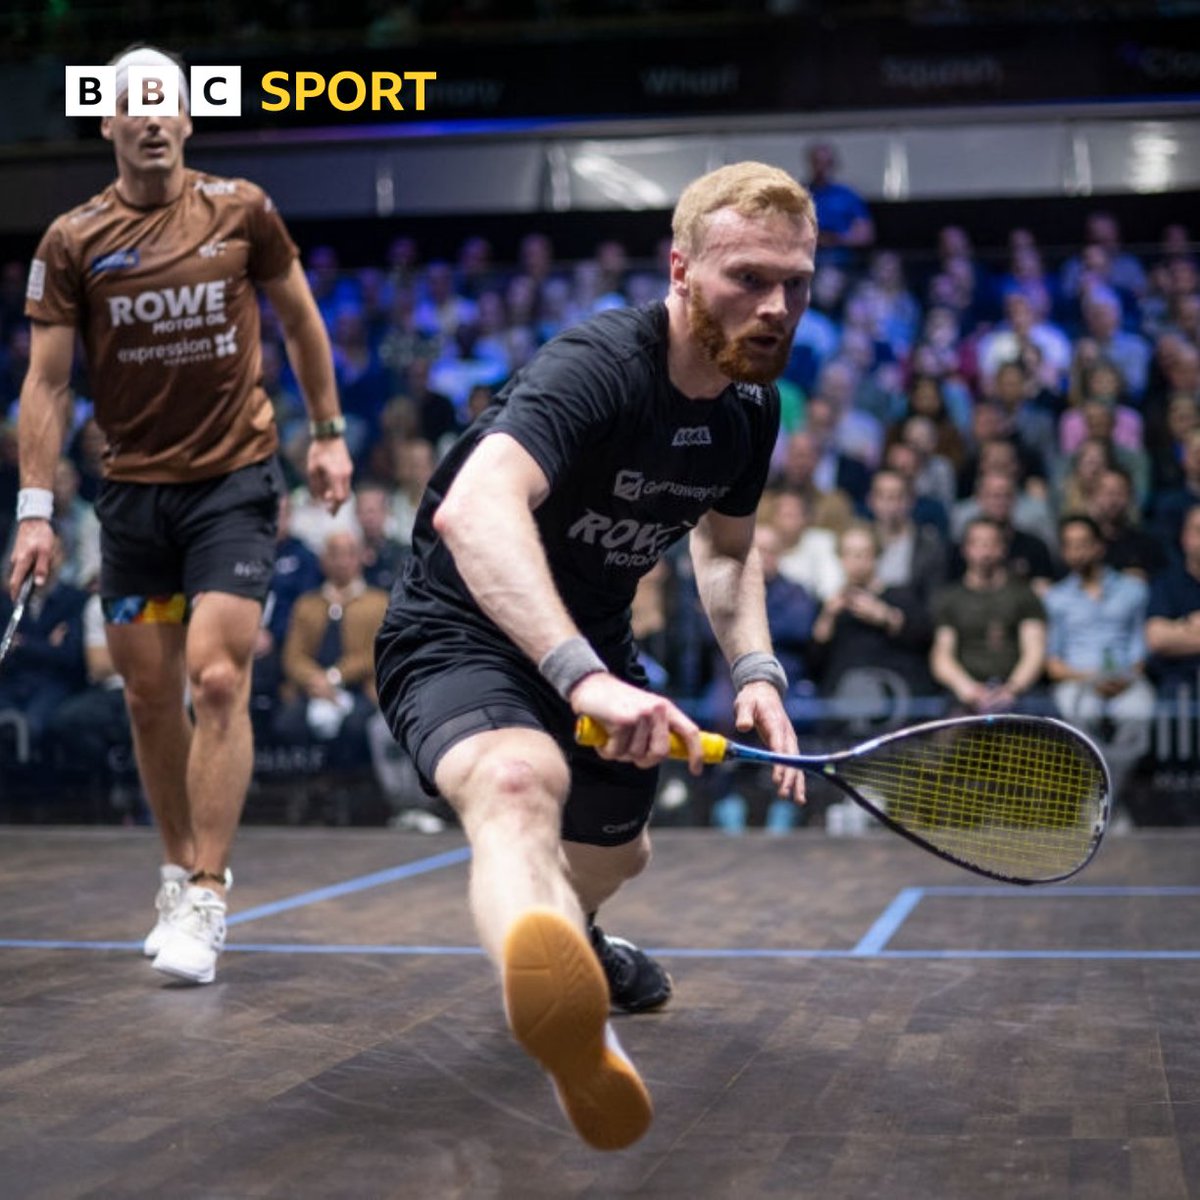 Victory for Wales' Joel Makin sees him book his slot in the Squash Grasshopper Cup Final 💪 #BBCSquash